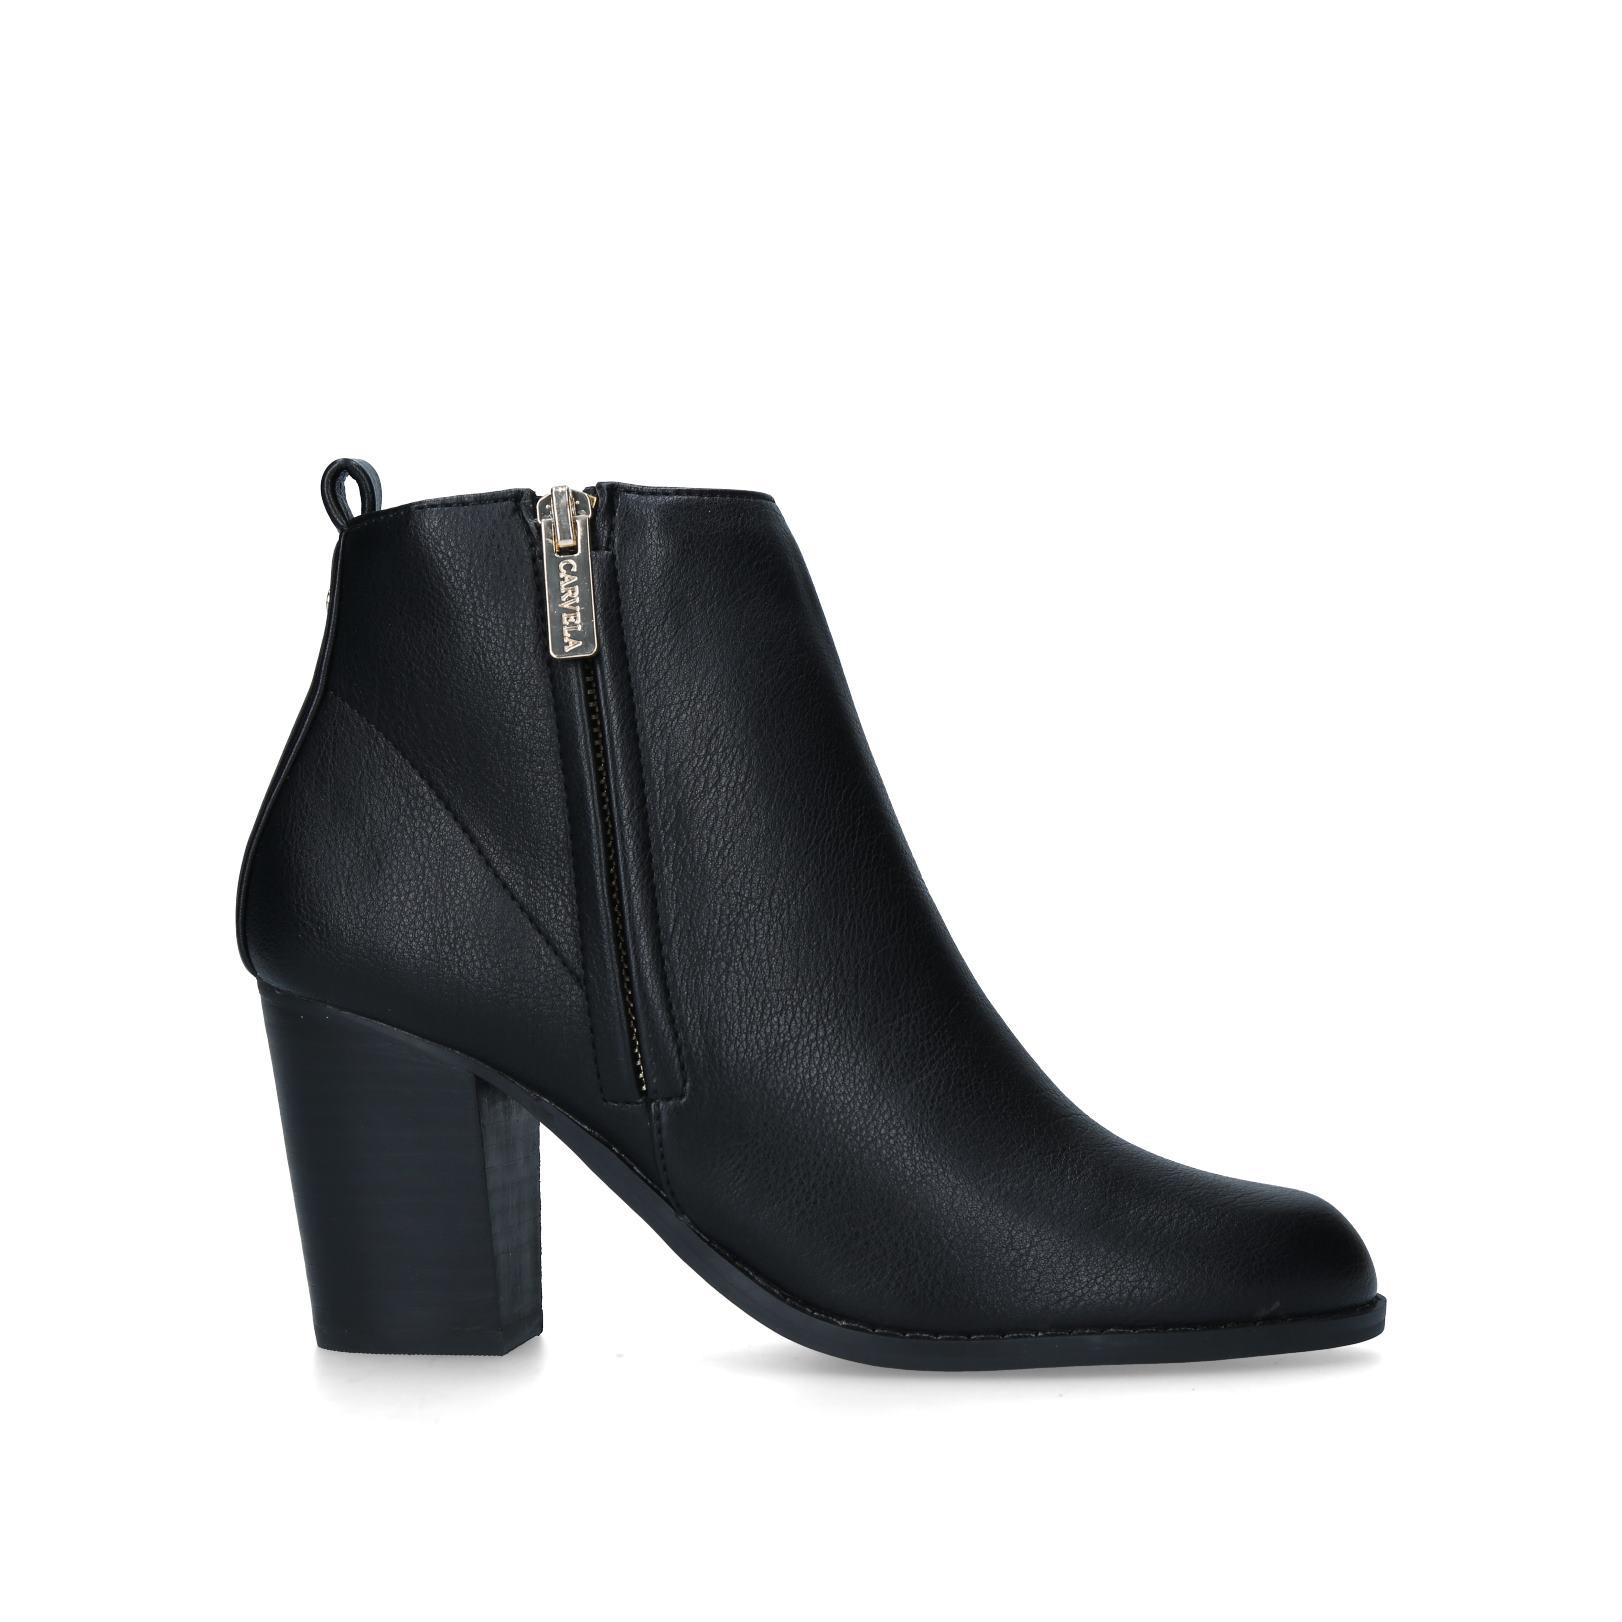 TANGLE - CARVELA Ankle Boots